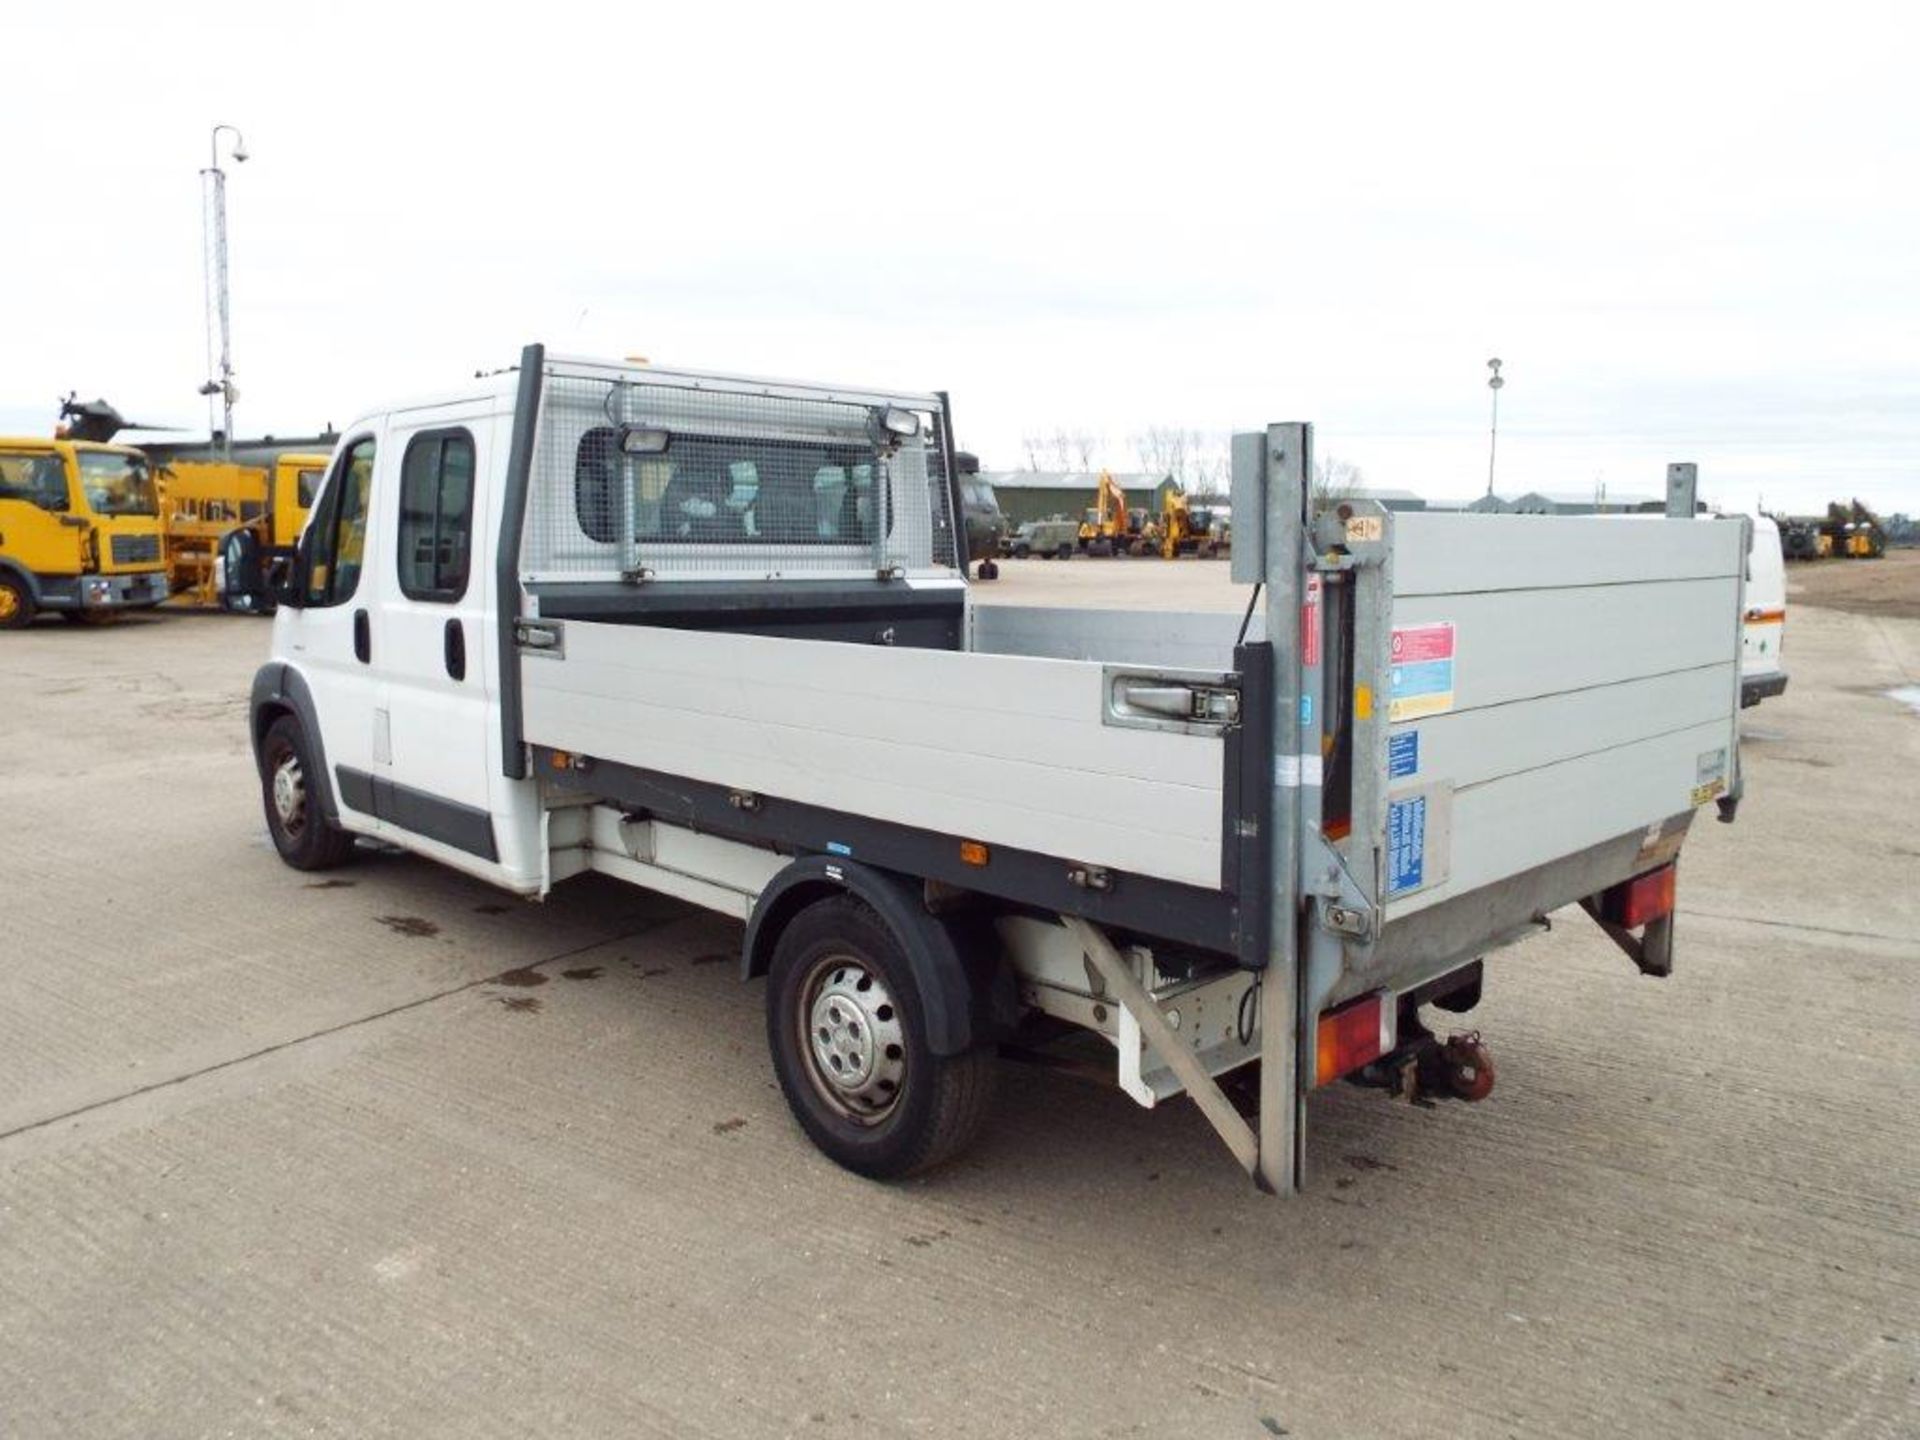 Citroen Relay 7 Seater Double Cab Dropside Pickup with 500kg Ratcliff Palfinger Tail Lift - Image 5 of 29